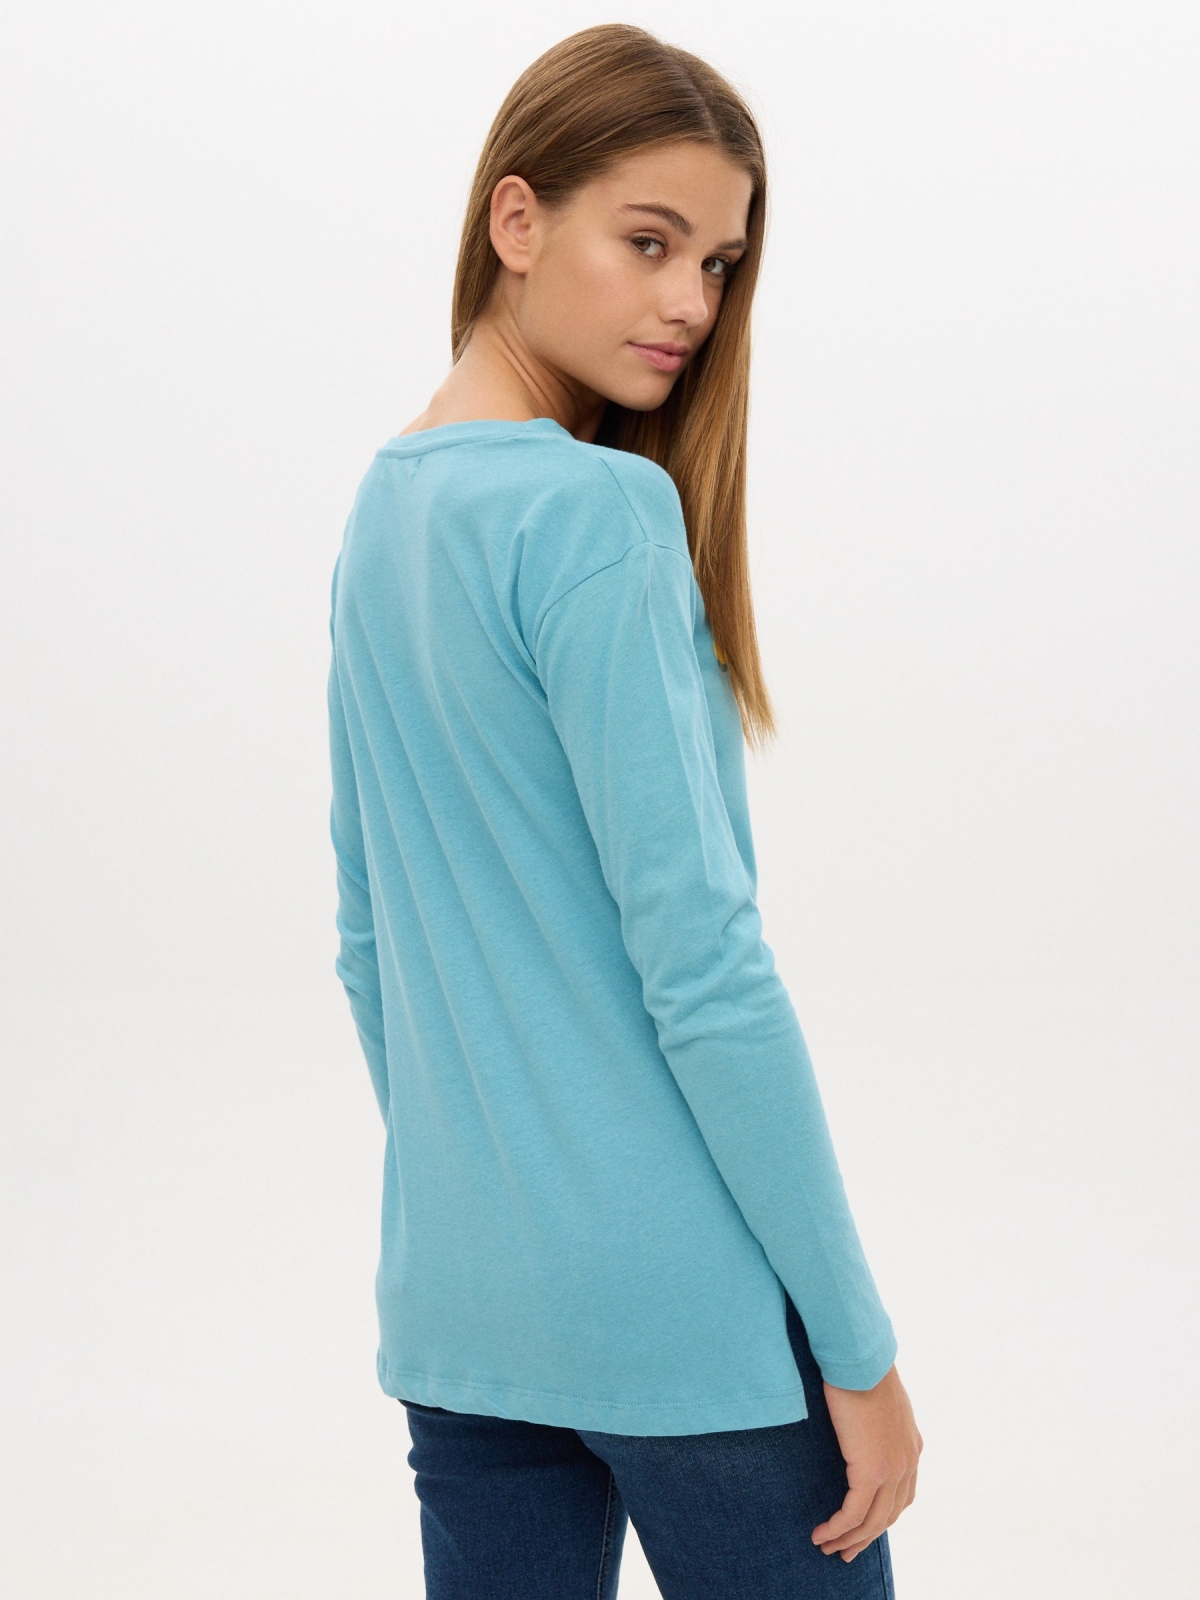 T-shirt with print blue middle back view